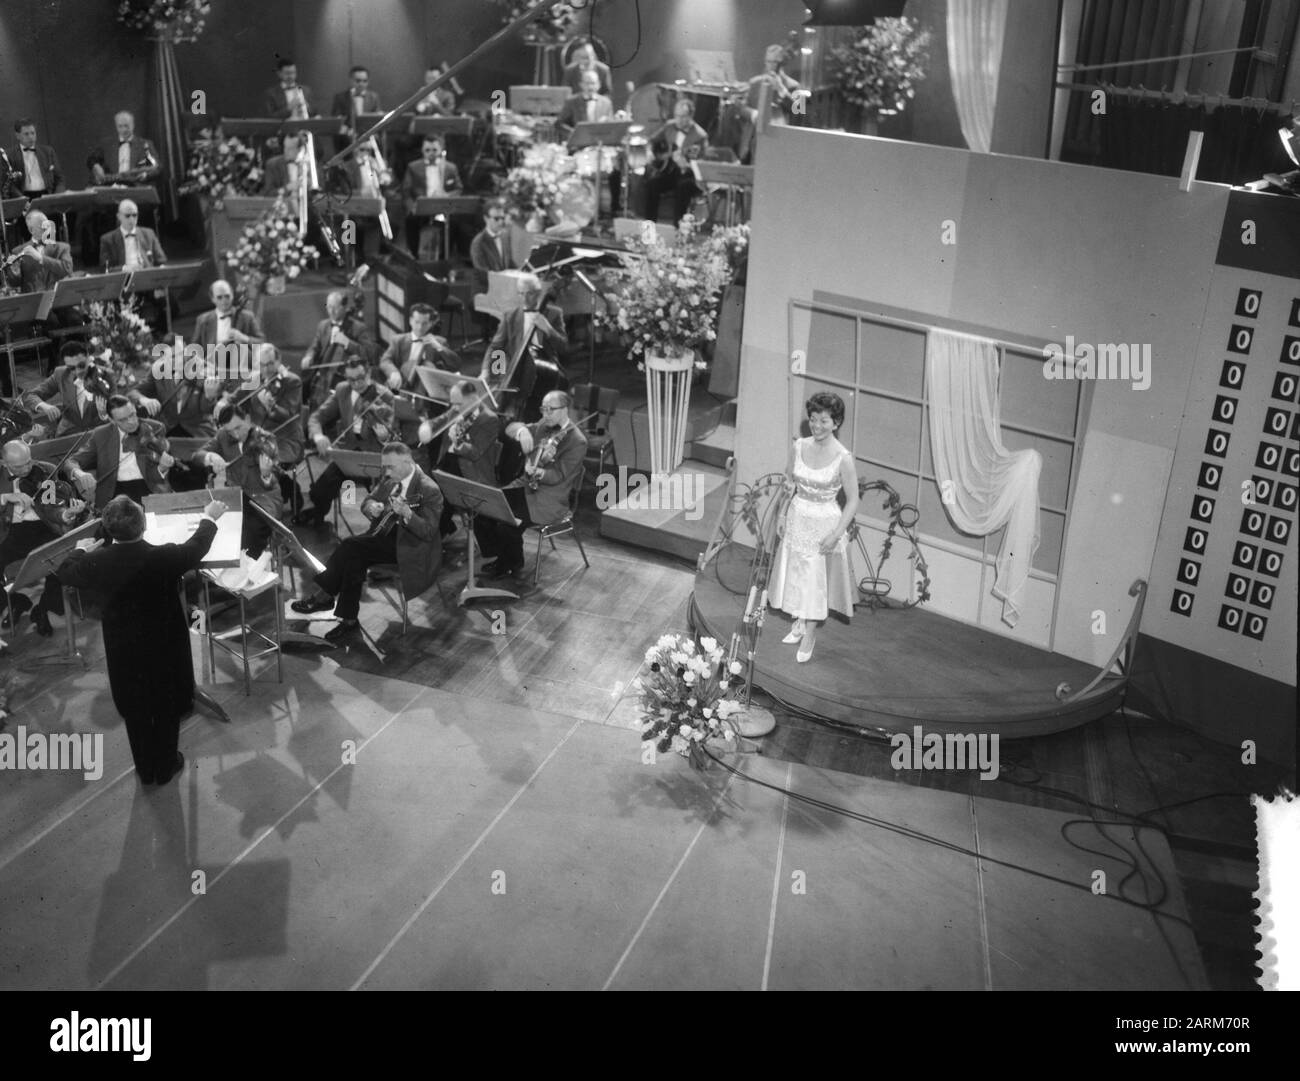 Eurovision Song Contest. Lys Assia (Switzerland) Date: March 11, 1958 Location: Hilversum Keywords: song festivals, singers Personal name: Assia Lys Stock Photo